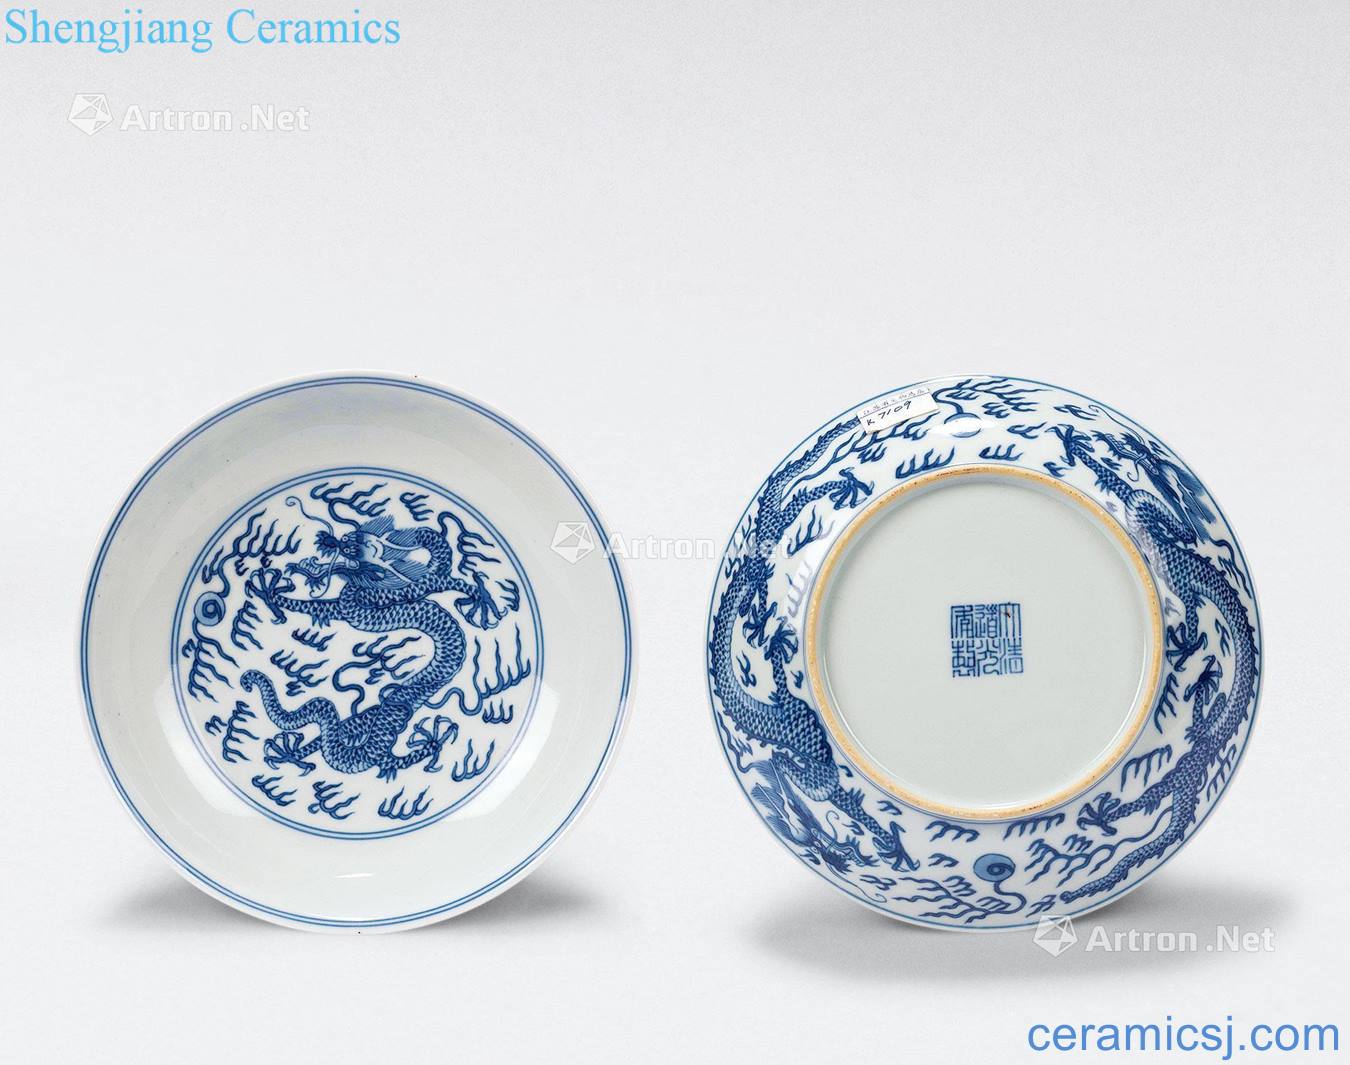 Qing daoguang Blue and white dragon playing bead plate (a)